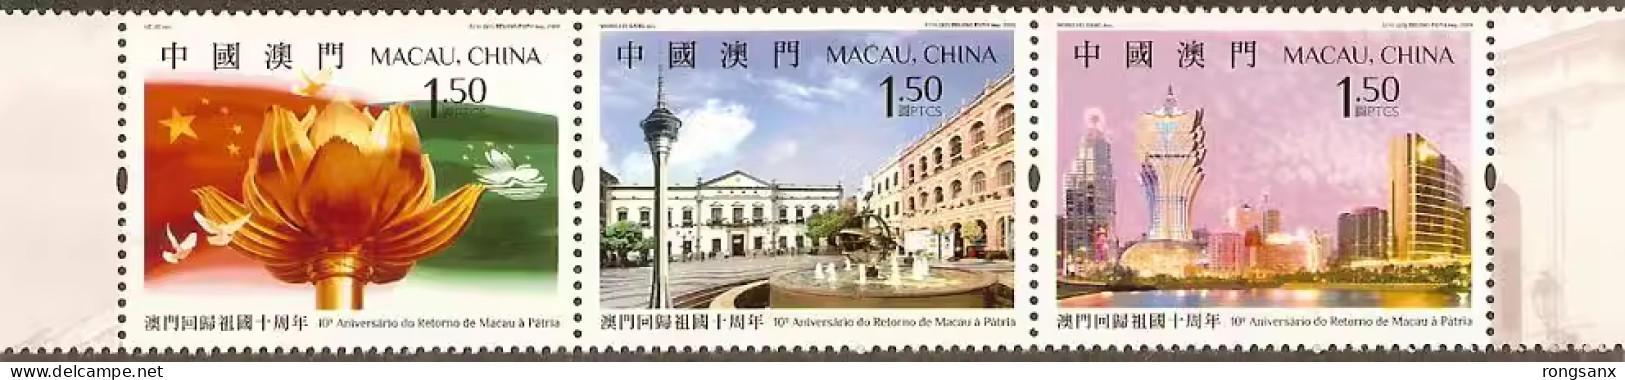 2009 MACAO 10 ANNI OF MACAO'S RETURN TO MOTHERLAND 3V STAMP - Neufs